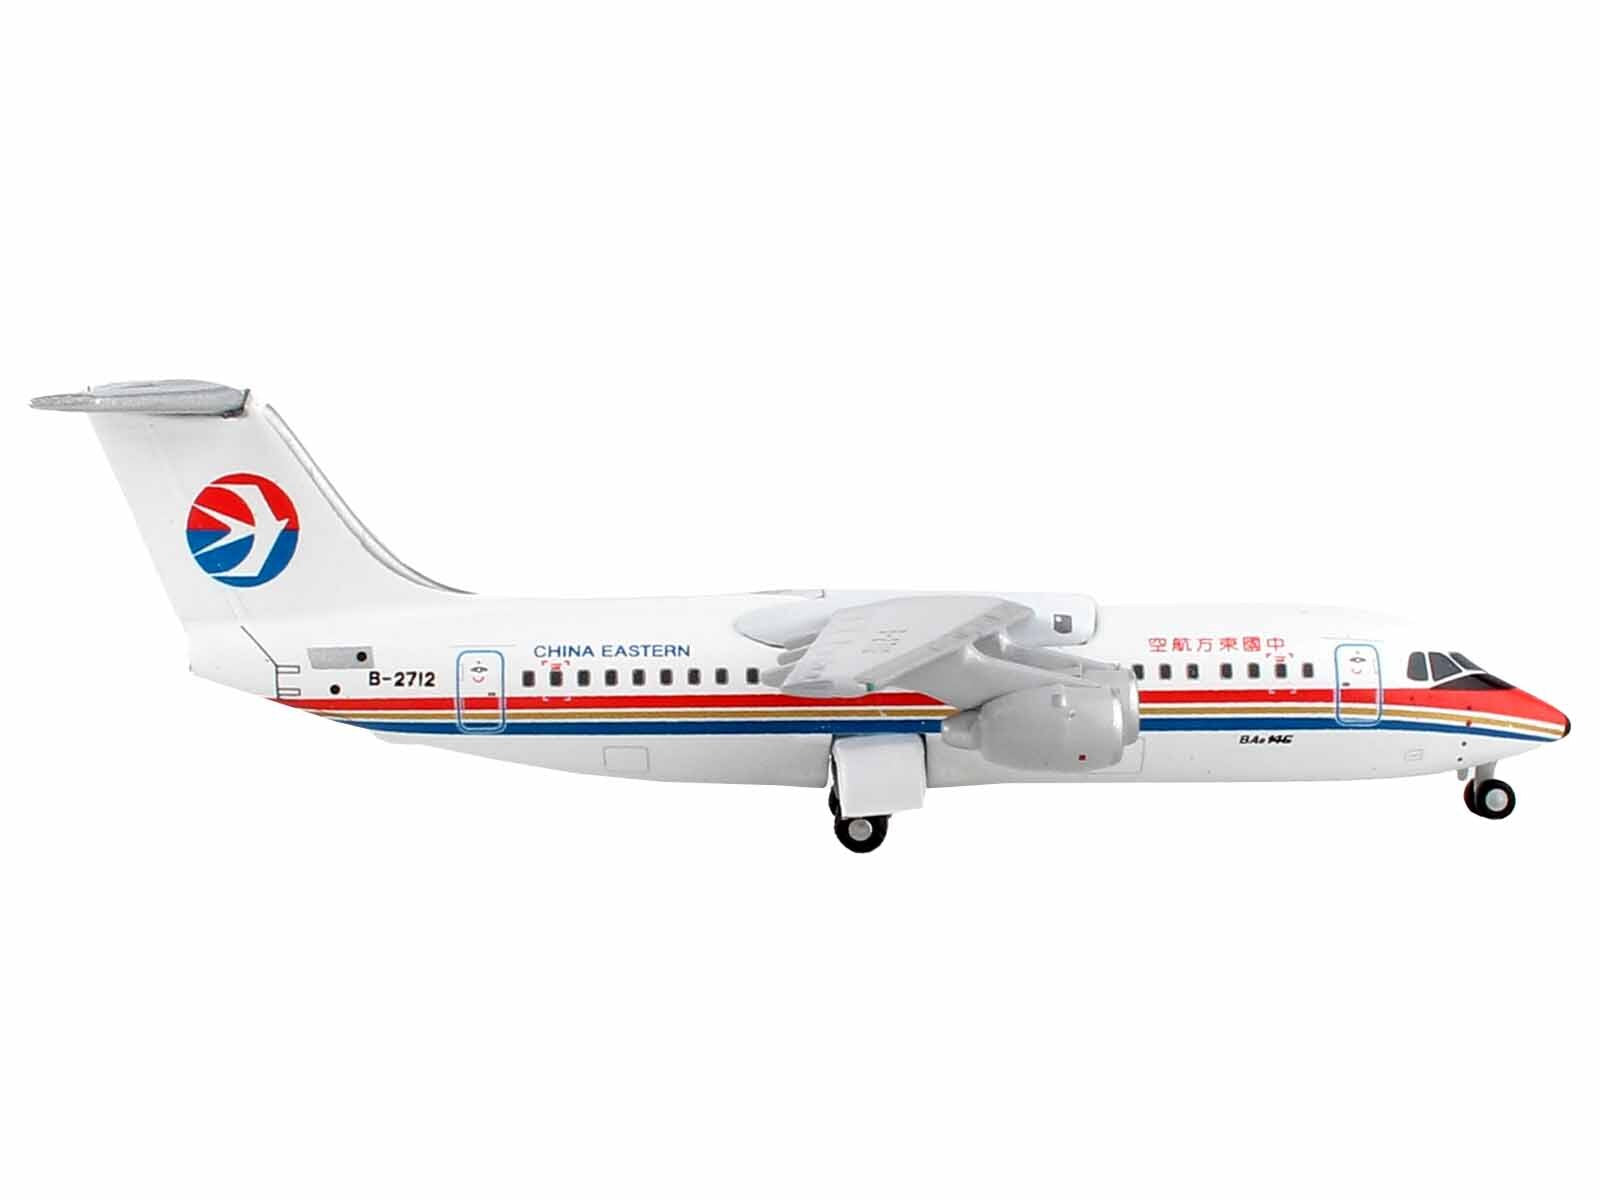 British Aerospace 146-300 Commercial Aircraft "China Eastern Airlines" White with Red and Blue Stripes 1/400 Diecast Model Airplane by GeminiJets